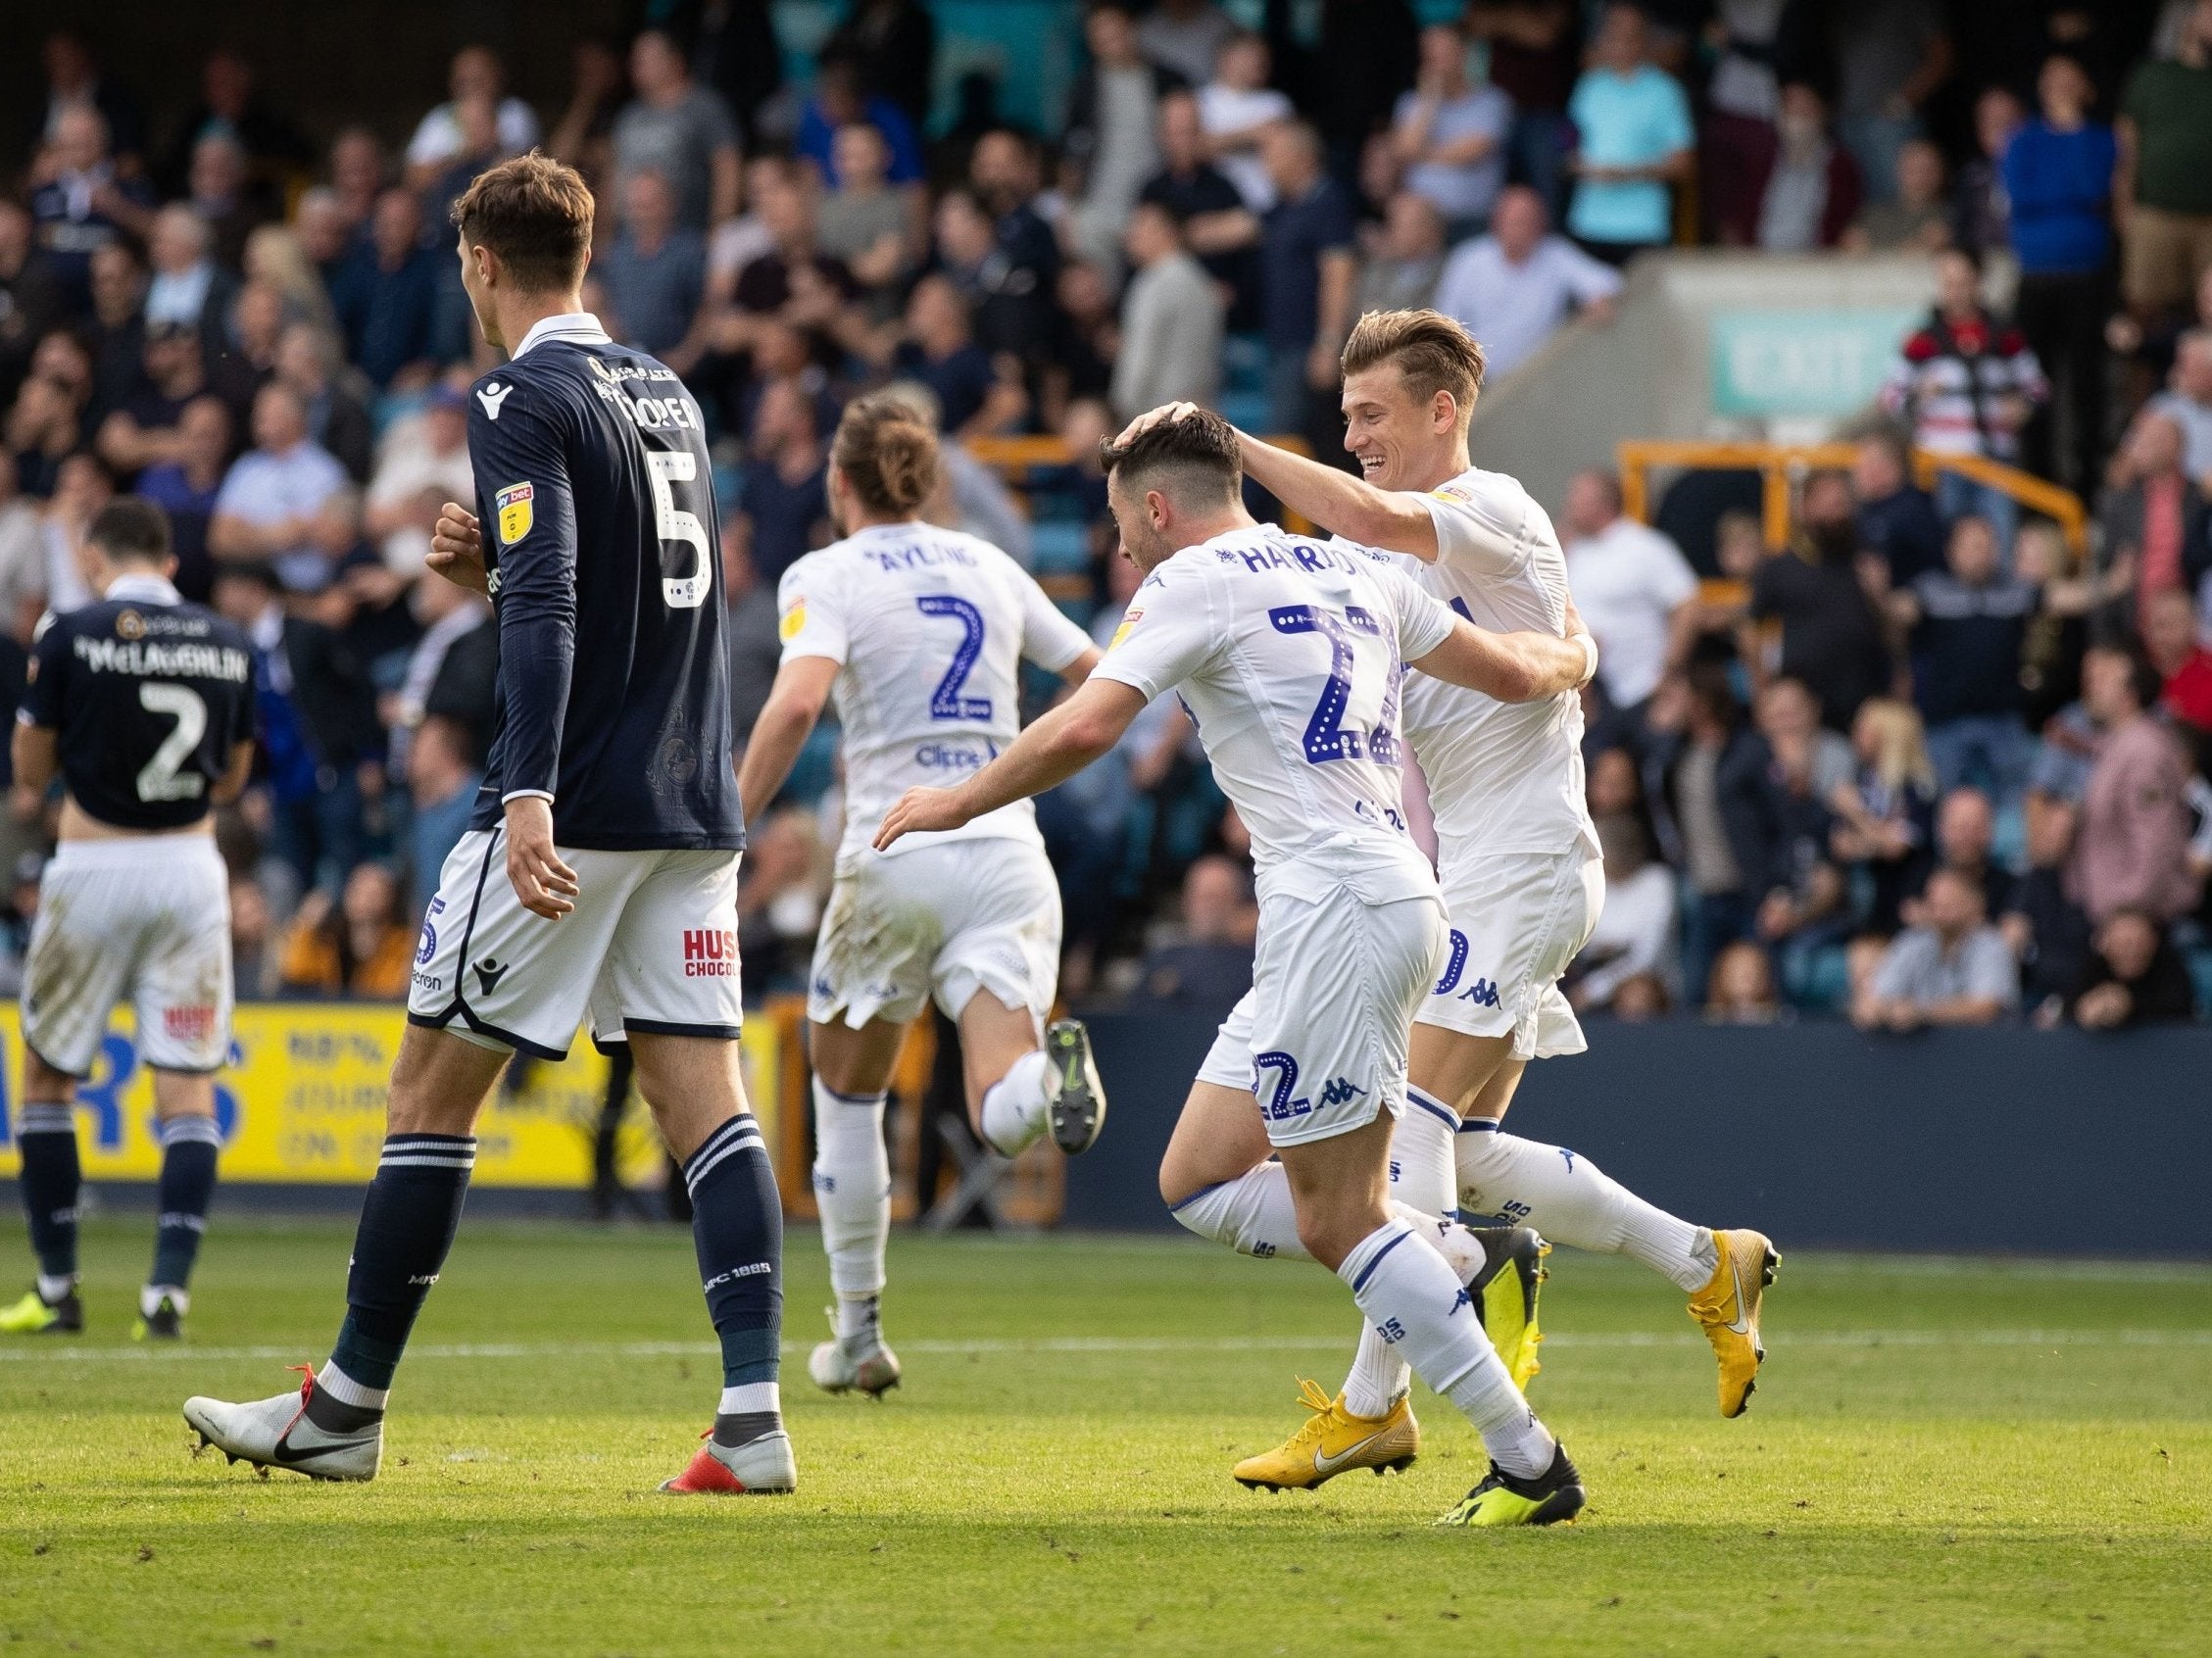 Where to find Millwall vs Leeds on US TV - World Soccer Talk